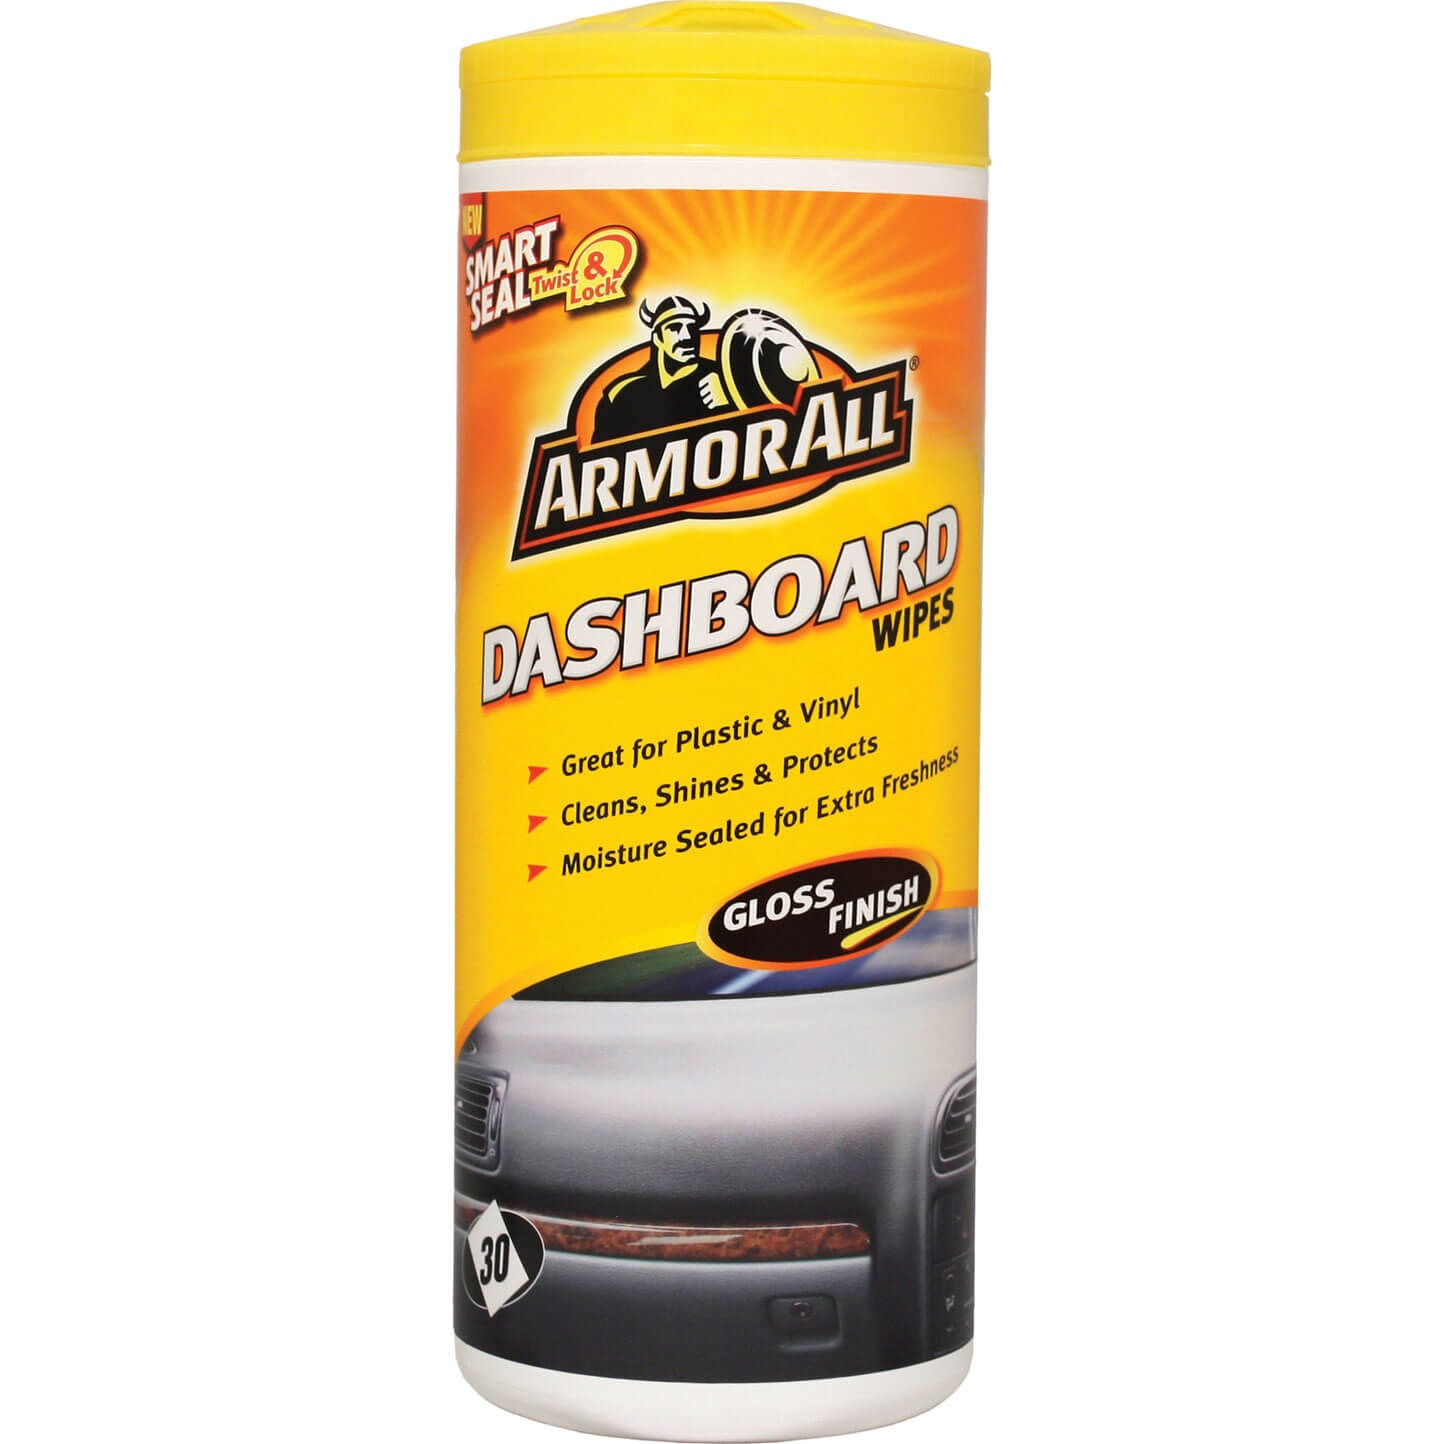 Armorall Interior Car Dashboard Wipes Interior Cleaning